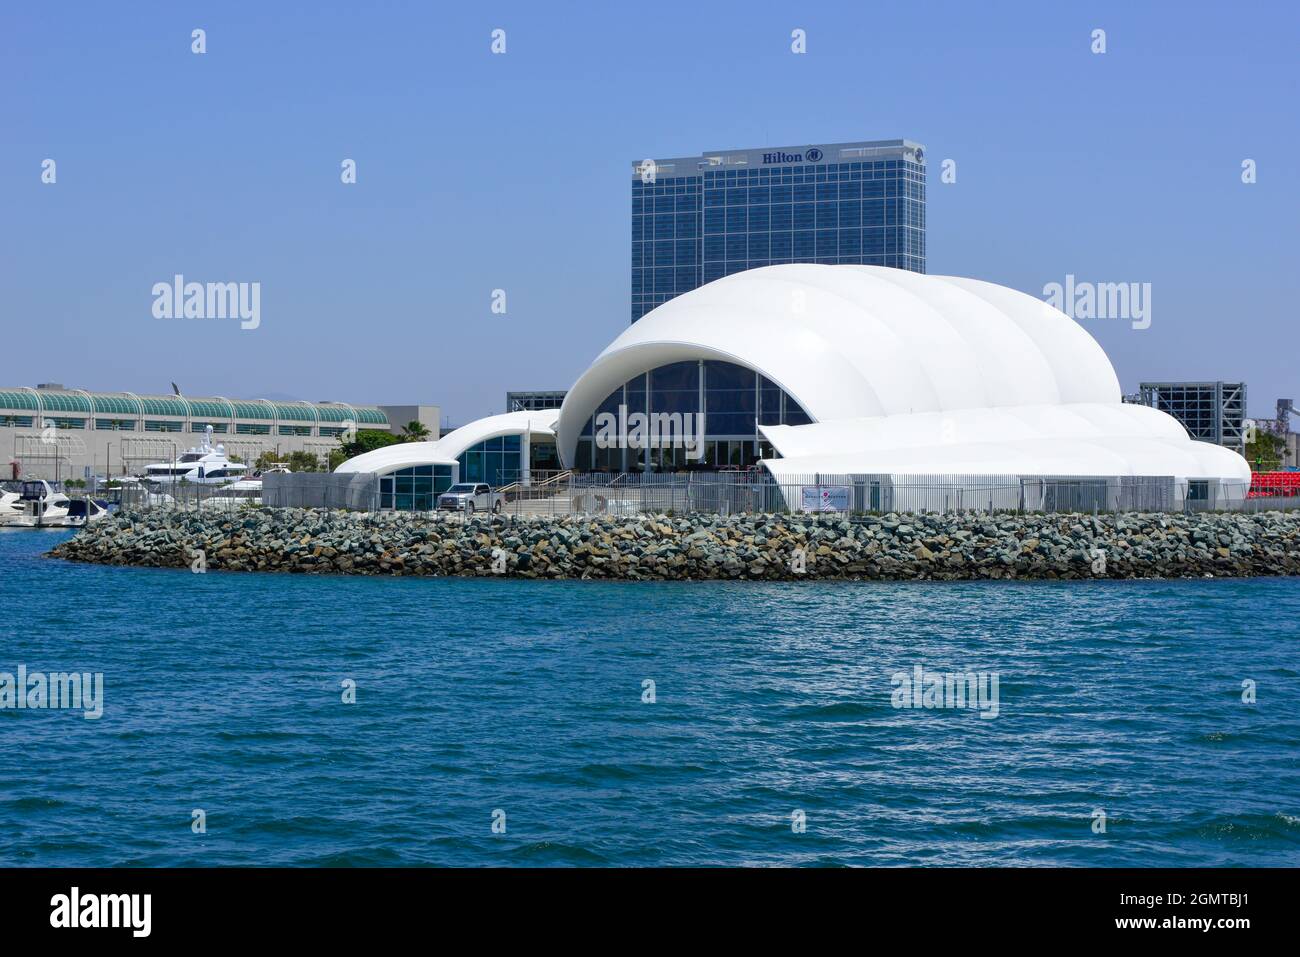 The iconic Rady Shell amphitheater at Jacobs Park located in Embarcadero Marina Park South, home to the San Diego Symphony, on the San Diego, CA bay Stock Photo